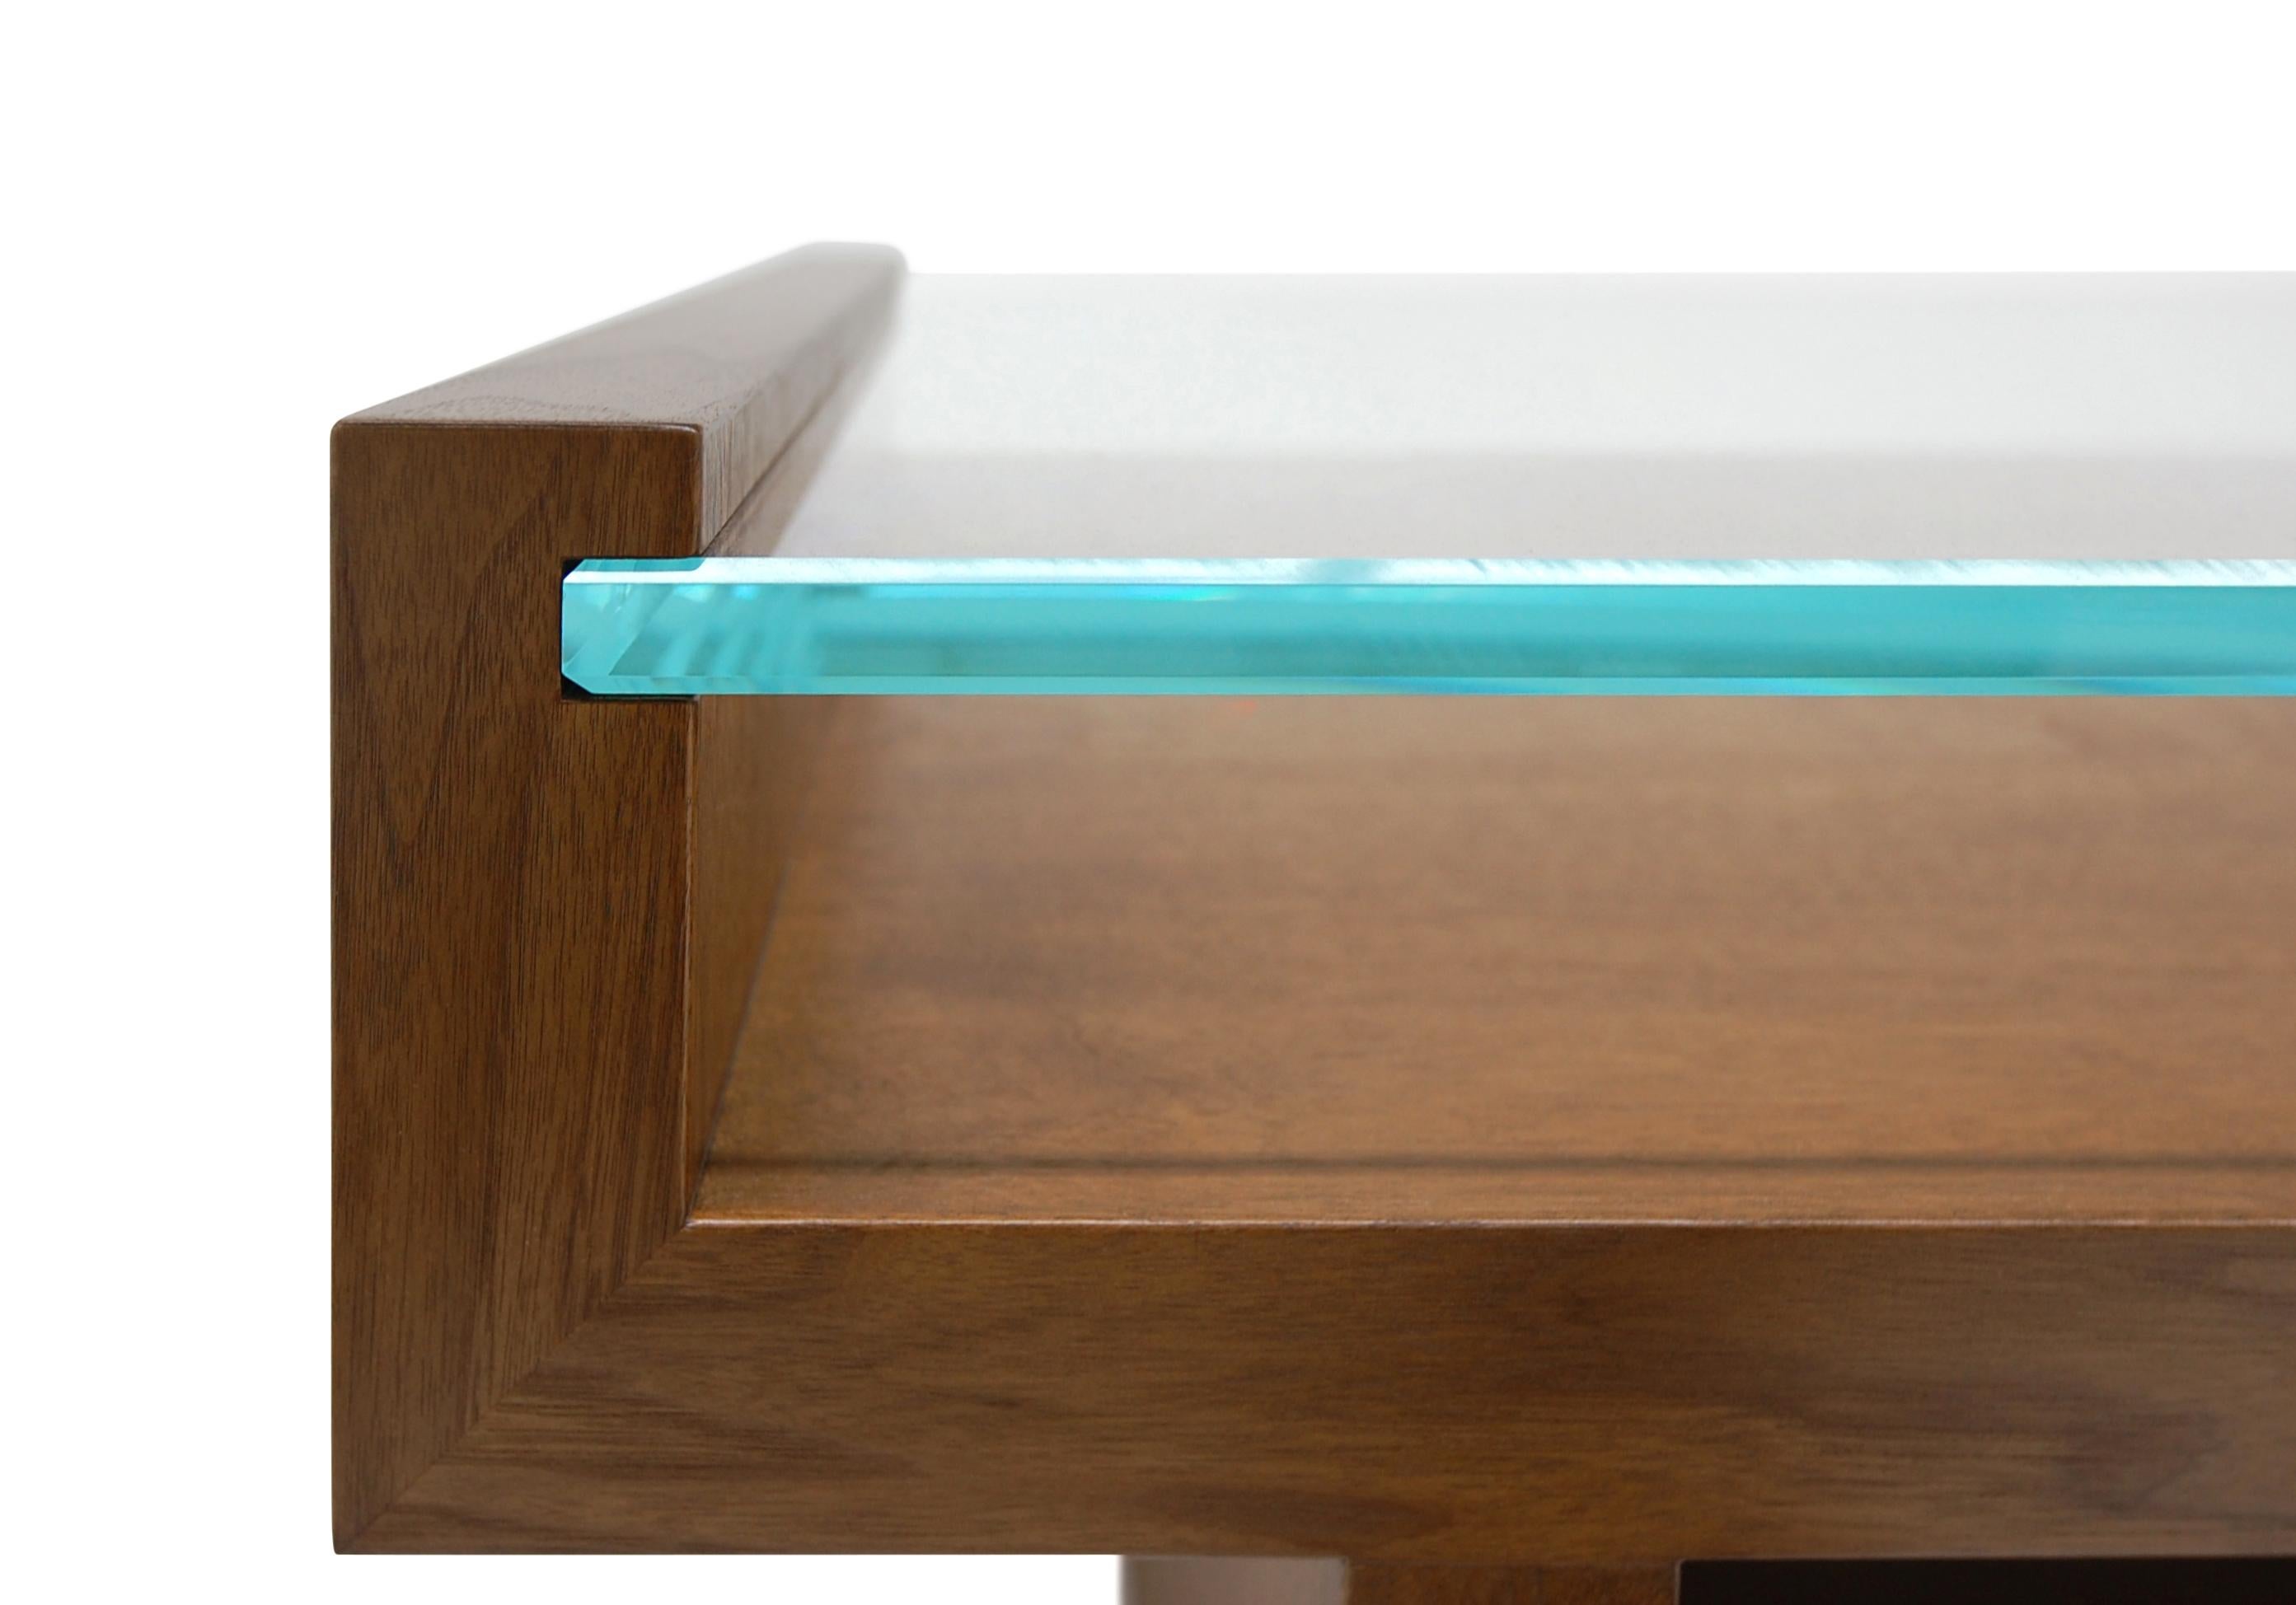 he stunning Hinge table is a harmonious balance between its sleek sophisticated glass top and the strong Walnut base into which it is set. Clean lines and strong angles of this coffee table make this a bold choice for any space.

Glass: Starphire